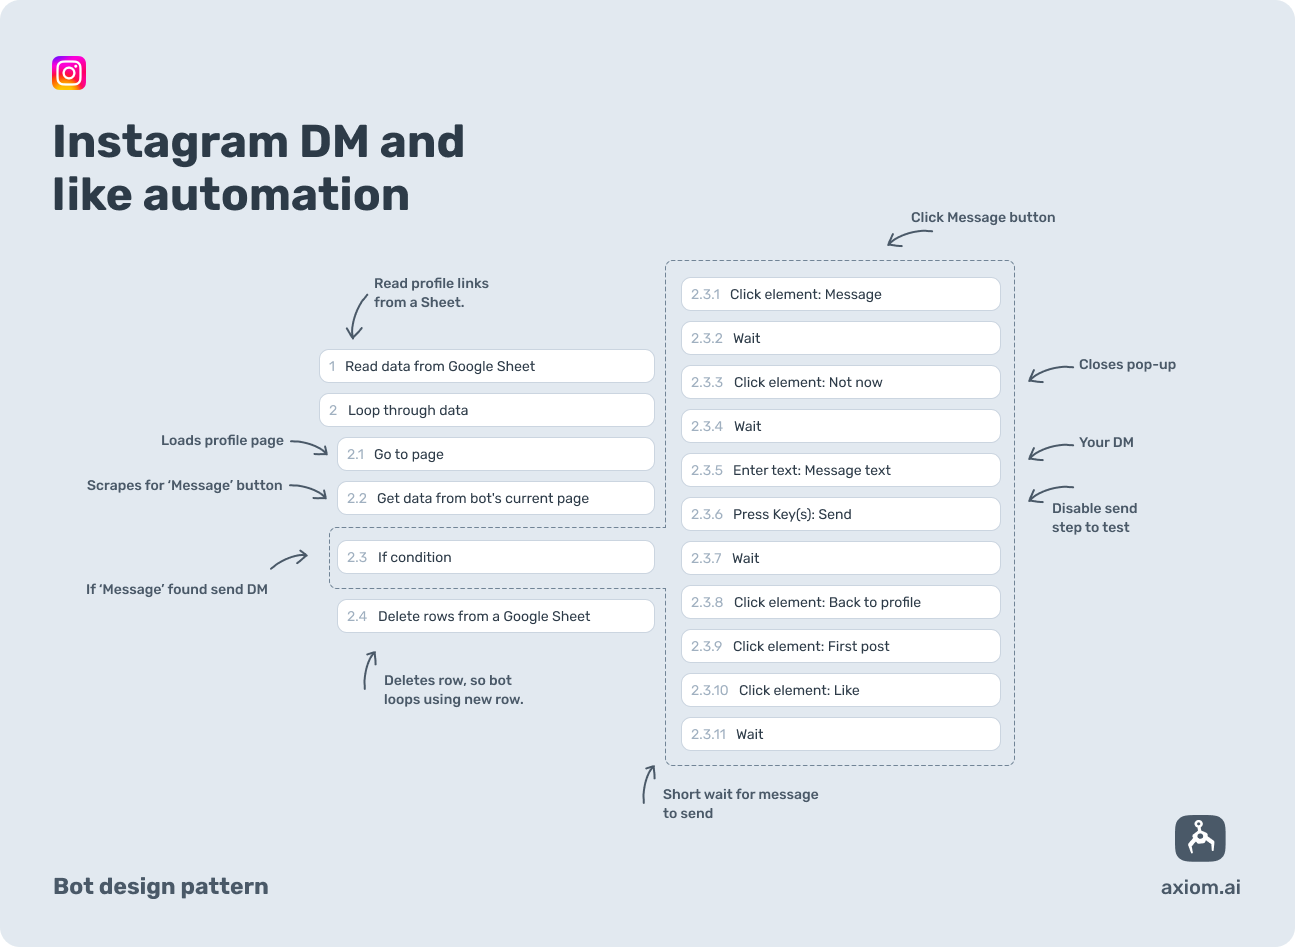 axiom.ai design pattern for instgram dm and like bot